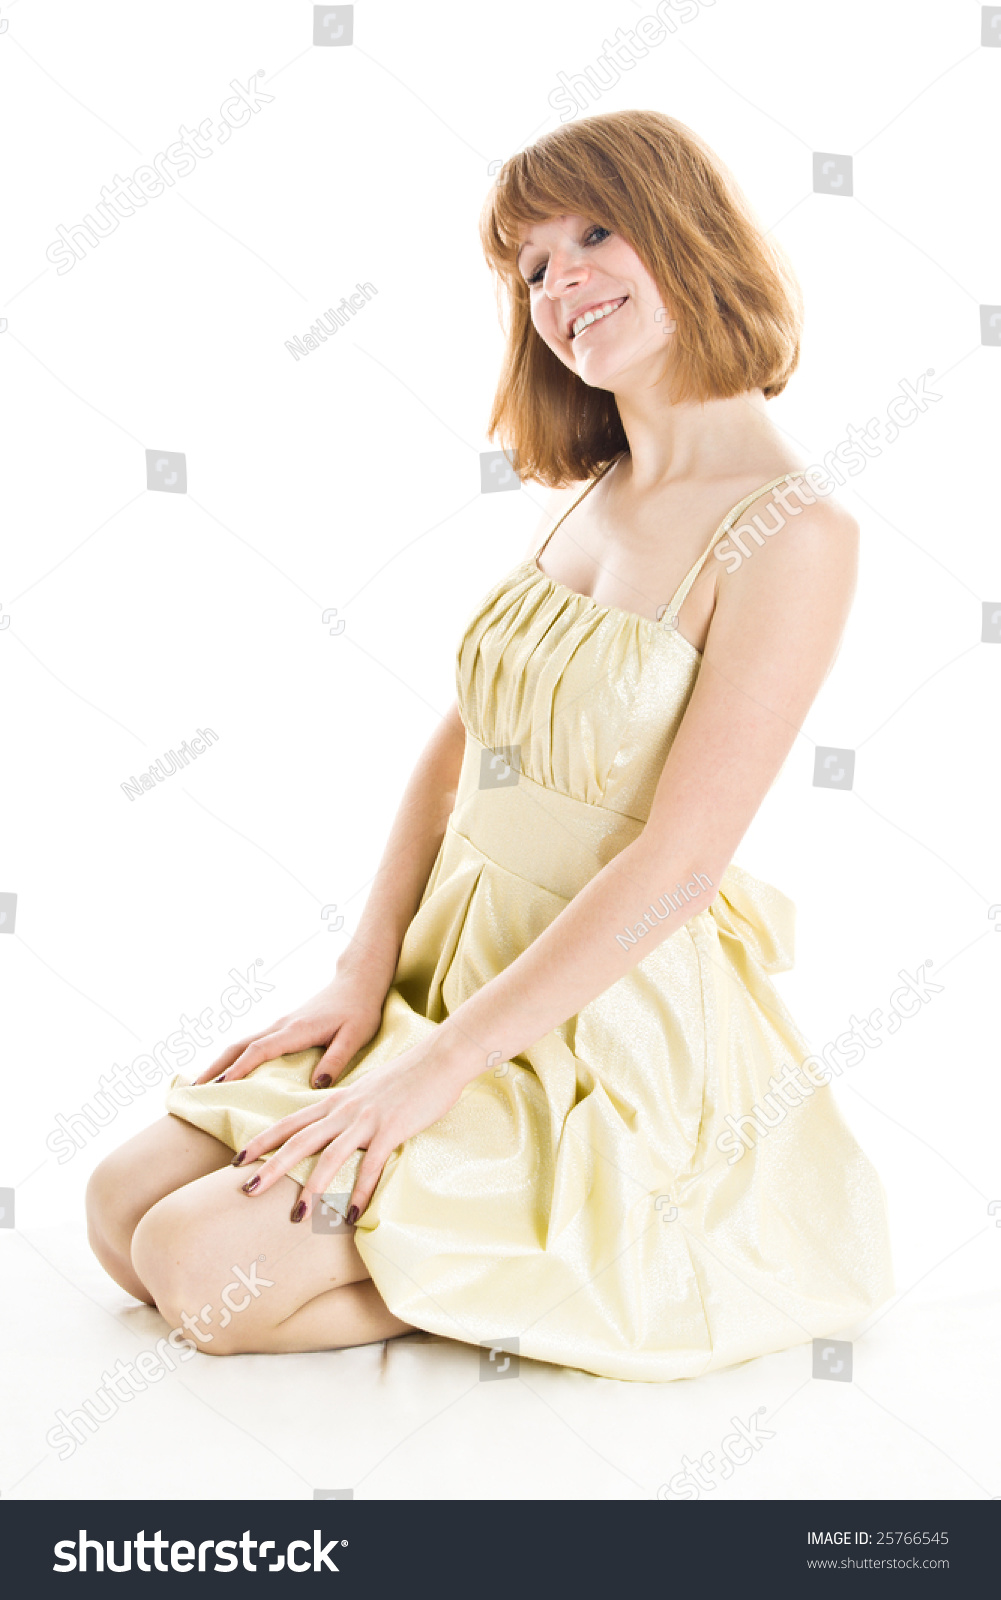 Beautiful Woman In Beige Dress Sitting On Knees Isolated On White